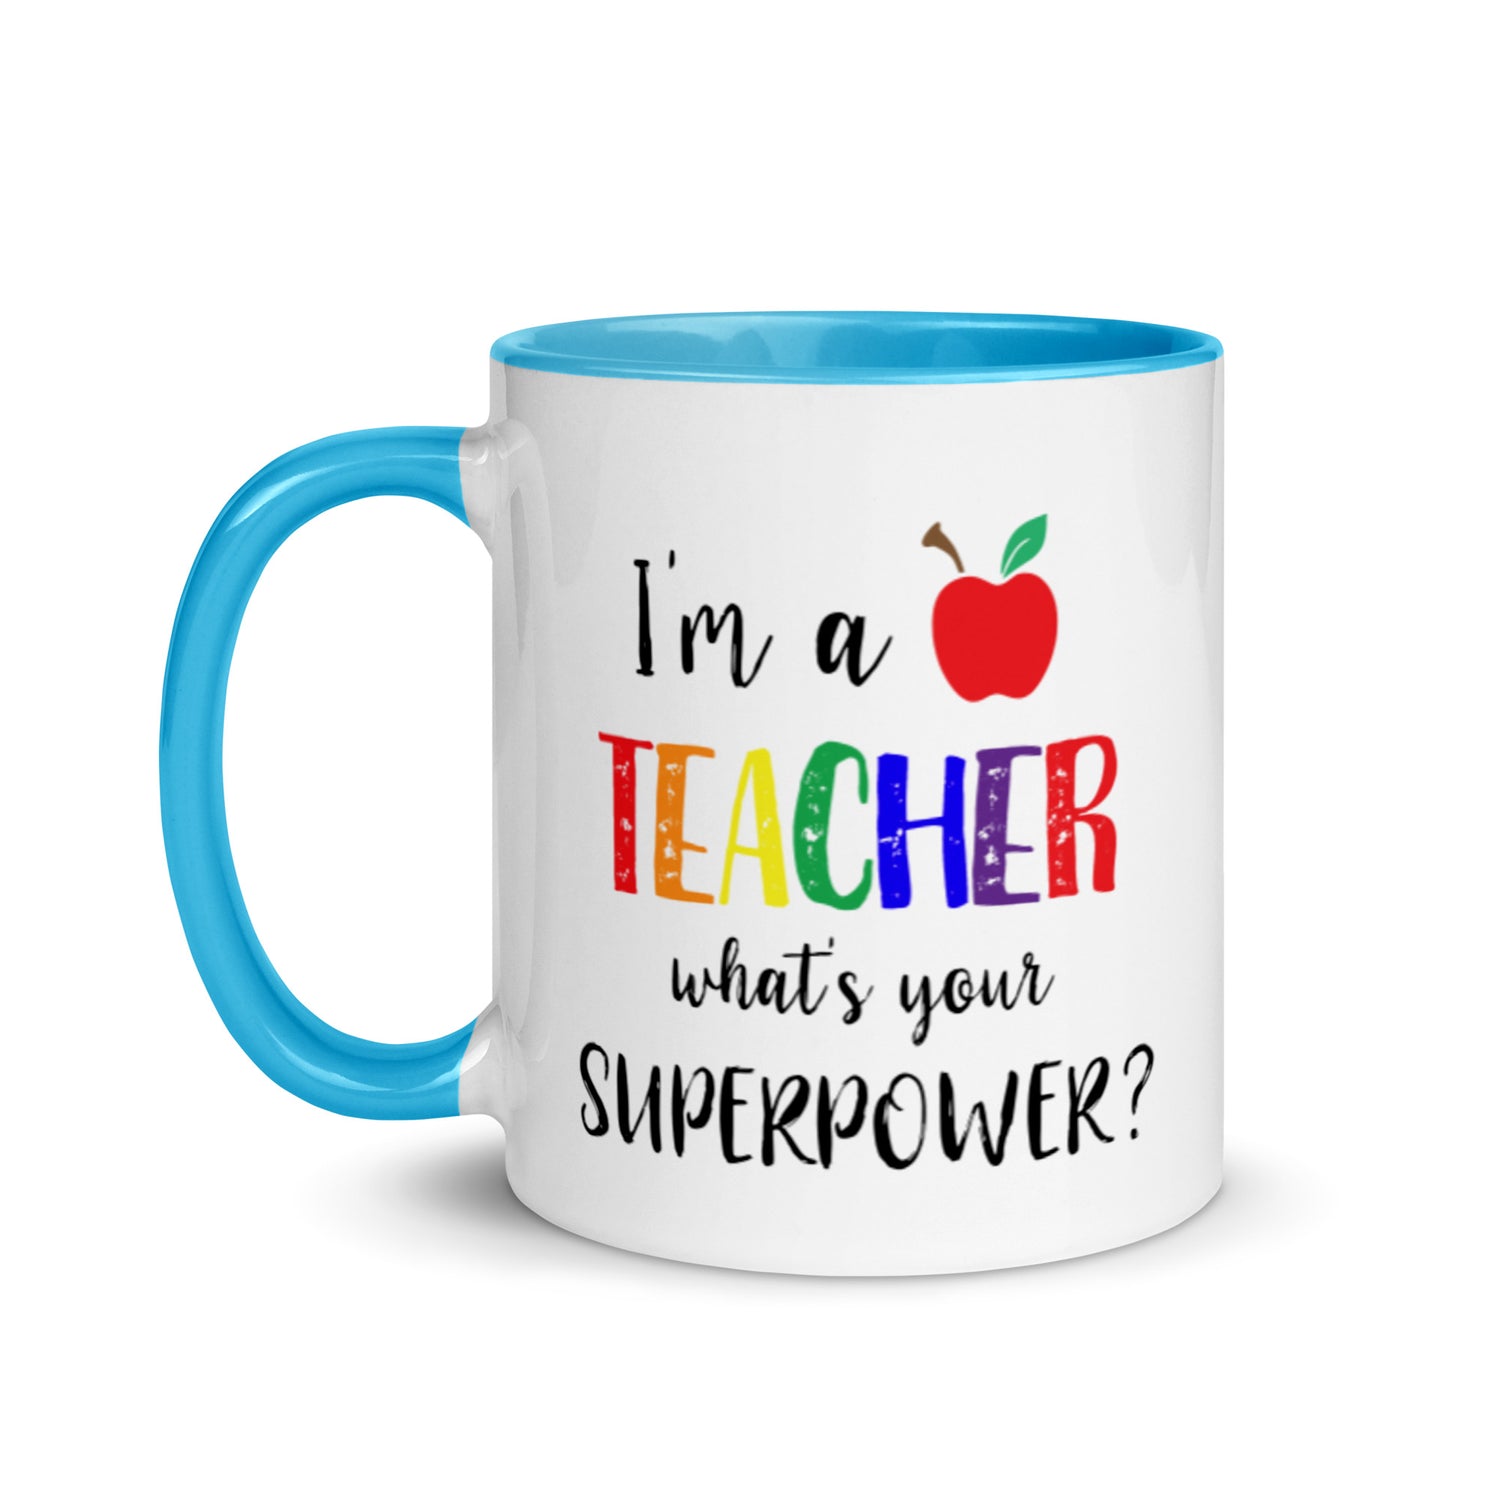 I'm a teacher what's your superpower mug with teal interior